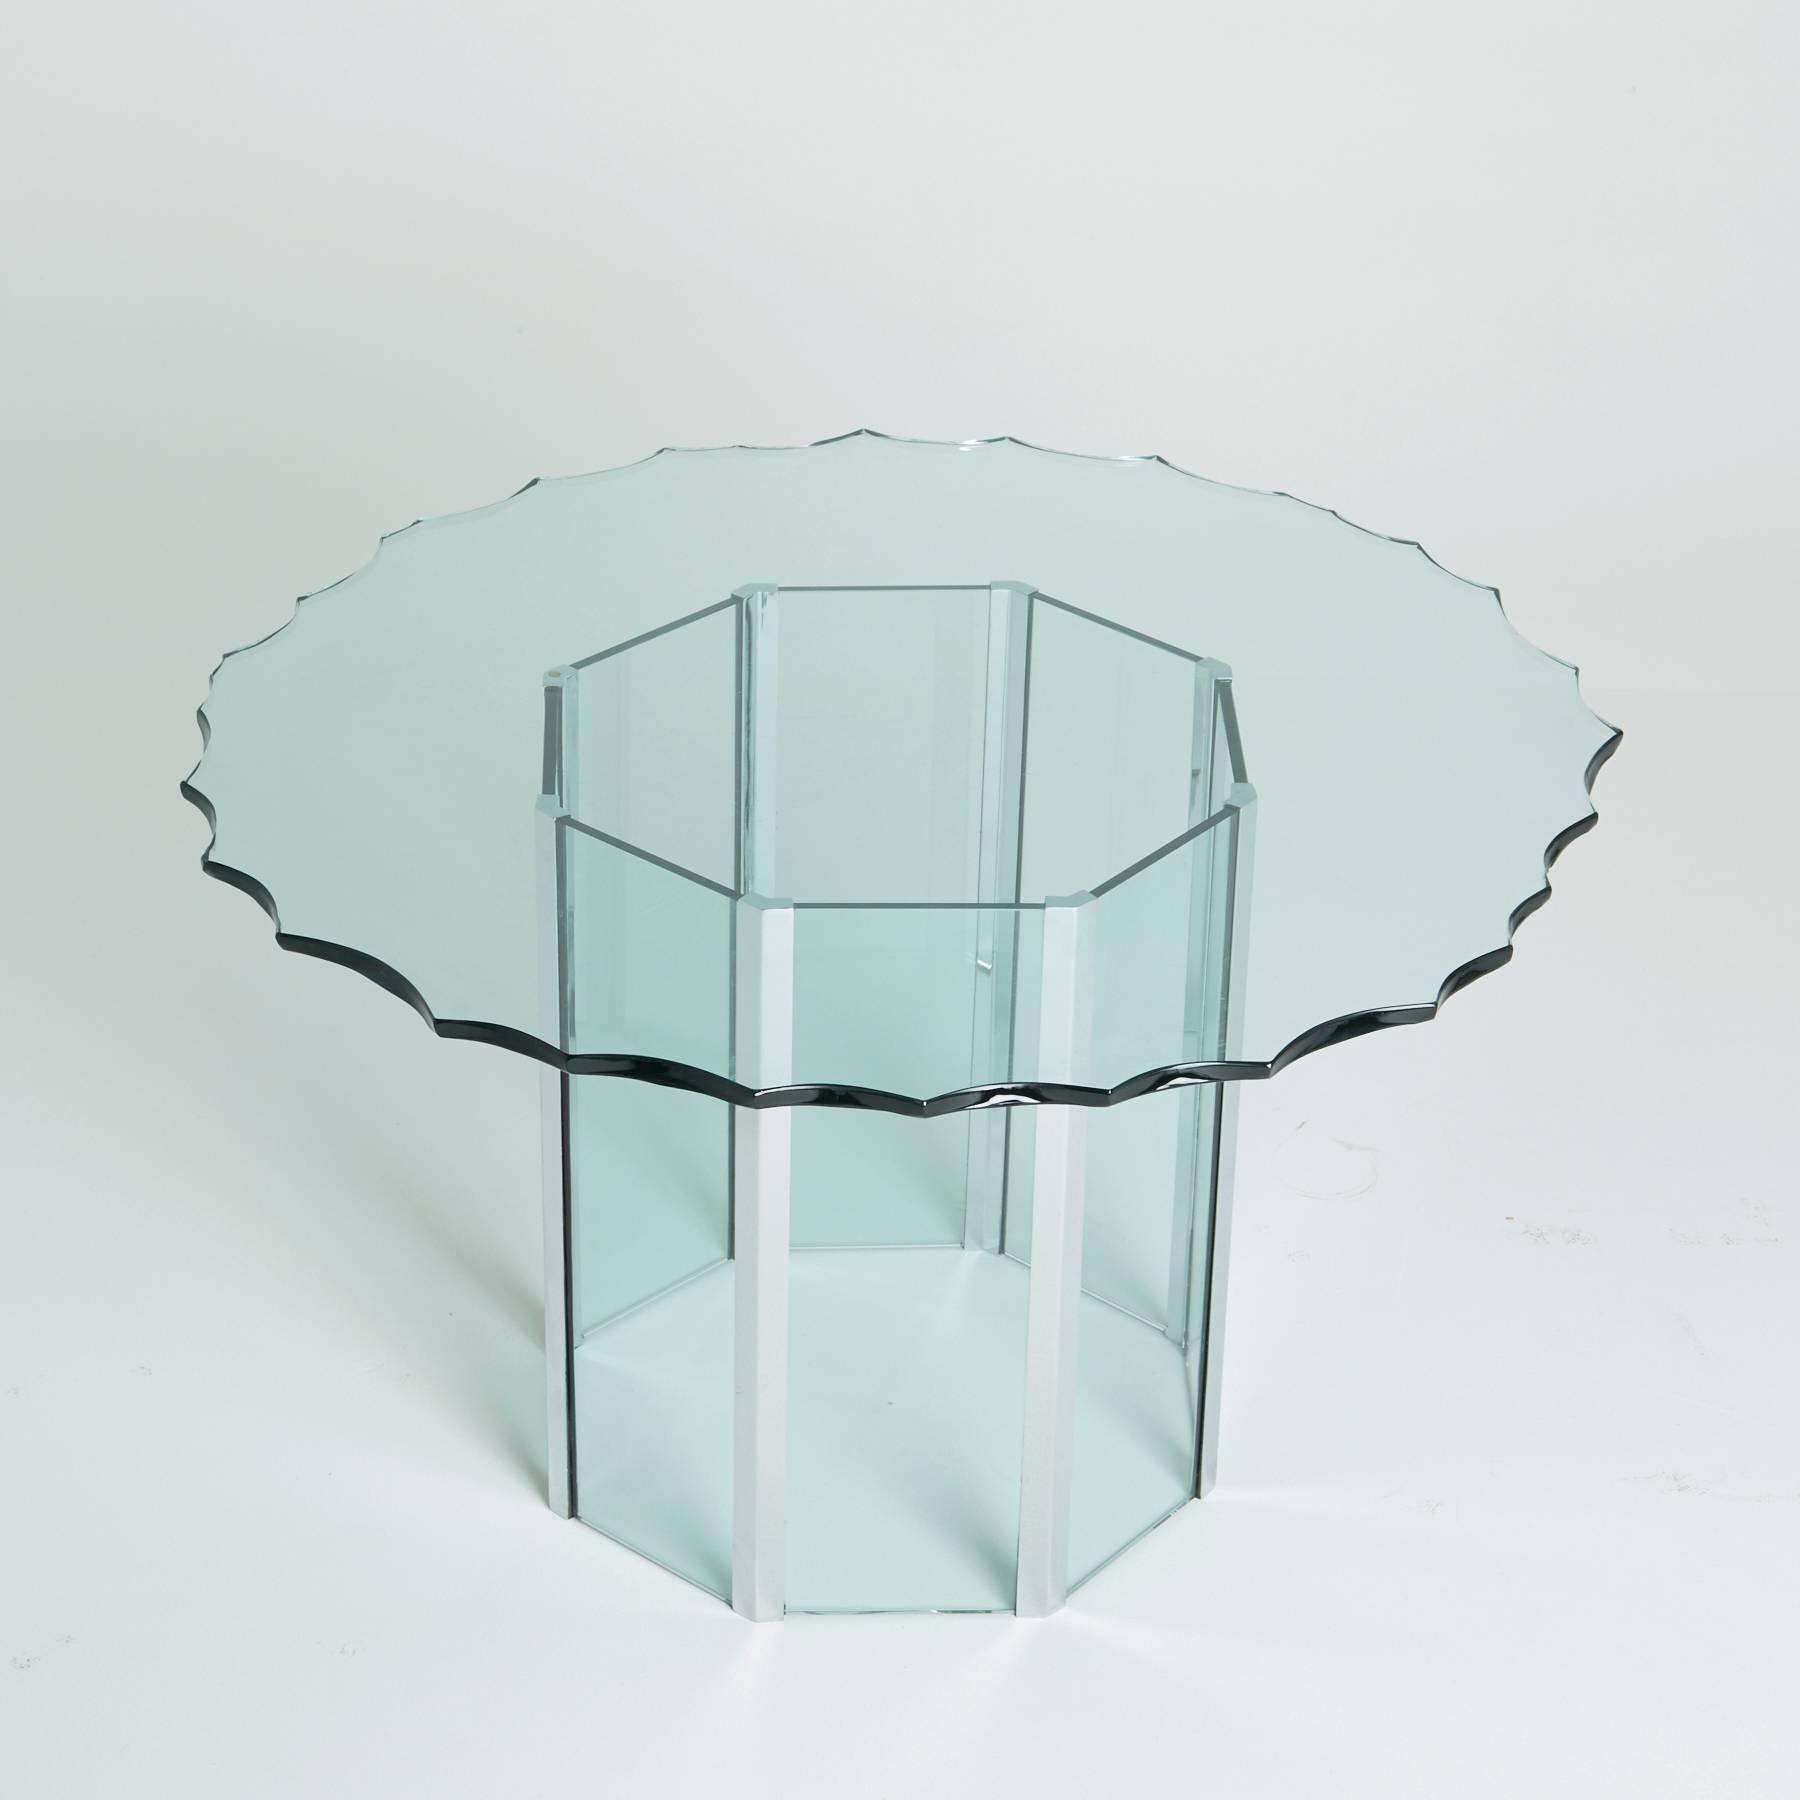 This unusual piece was a custom order created circa 1970 by Pace. The round, green glass was customized with stylistic divots along the edges of the round tabletop. Panels of green glass alternate around octagonal chrome frame of the base. Dining